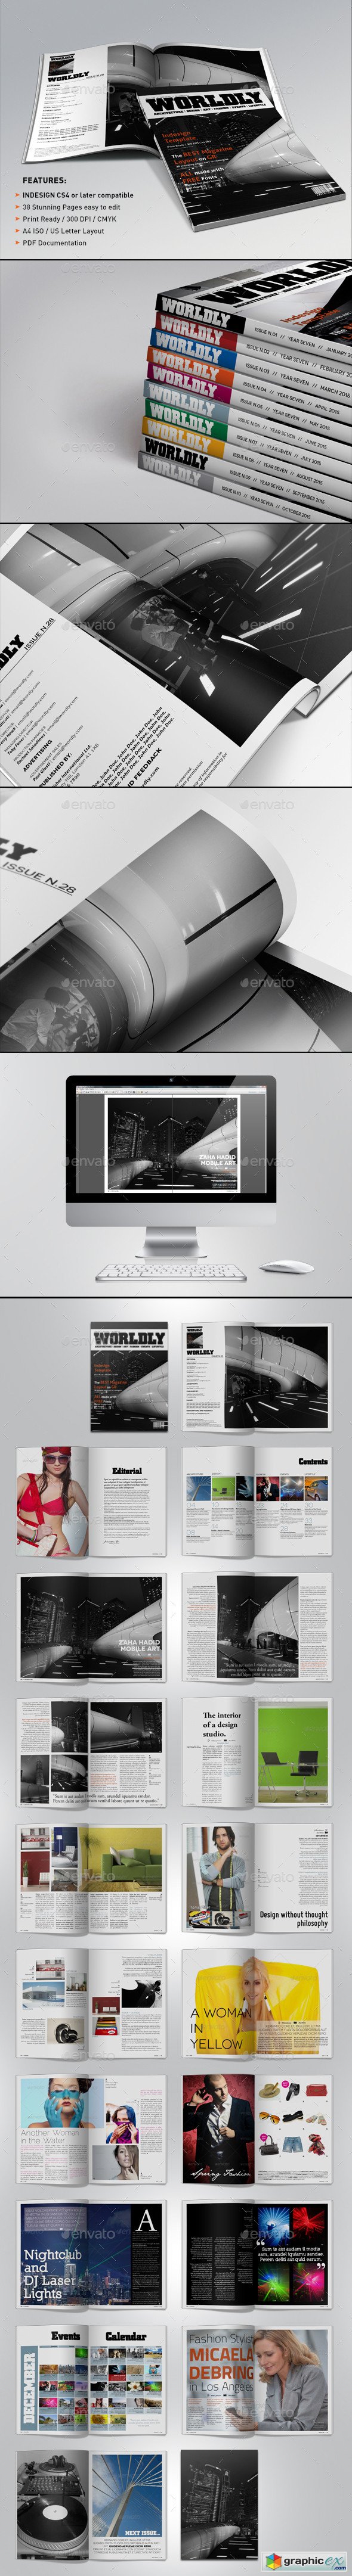 Wordly Magazine Indesign Template